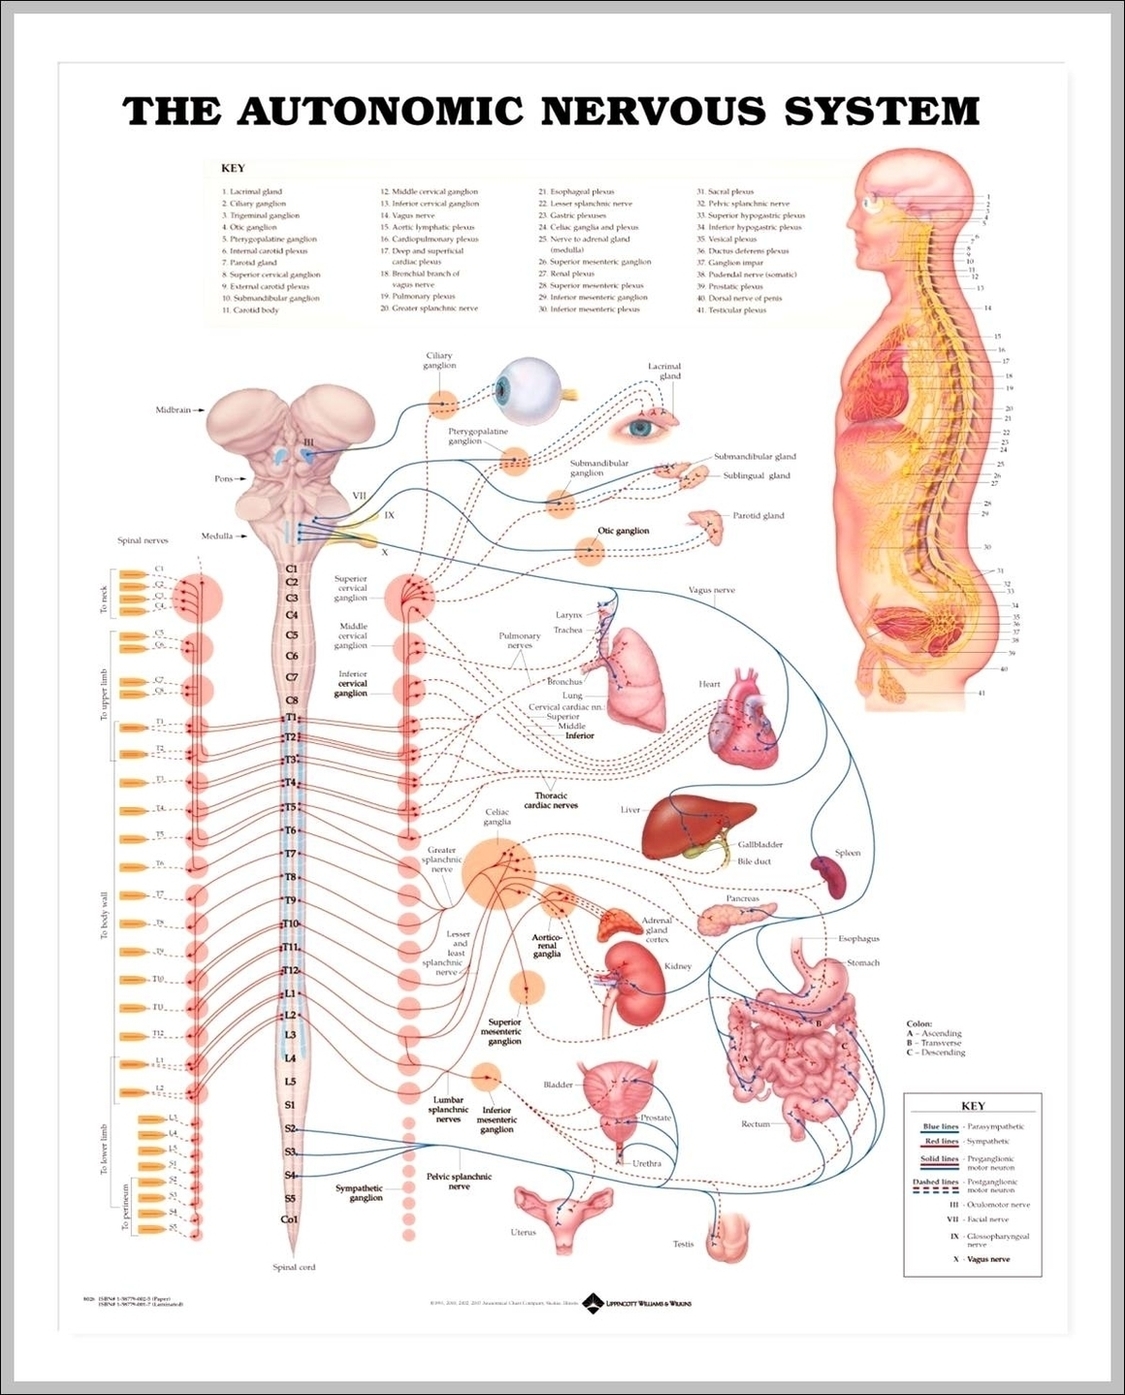 The Nervous System Chart Image